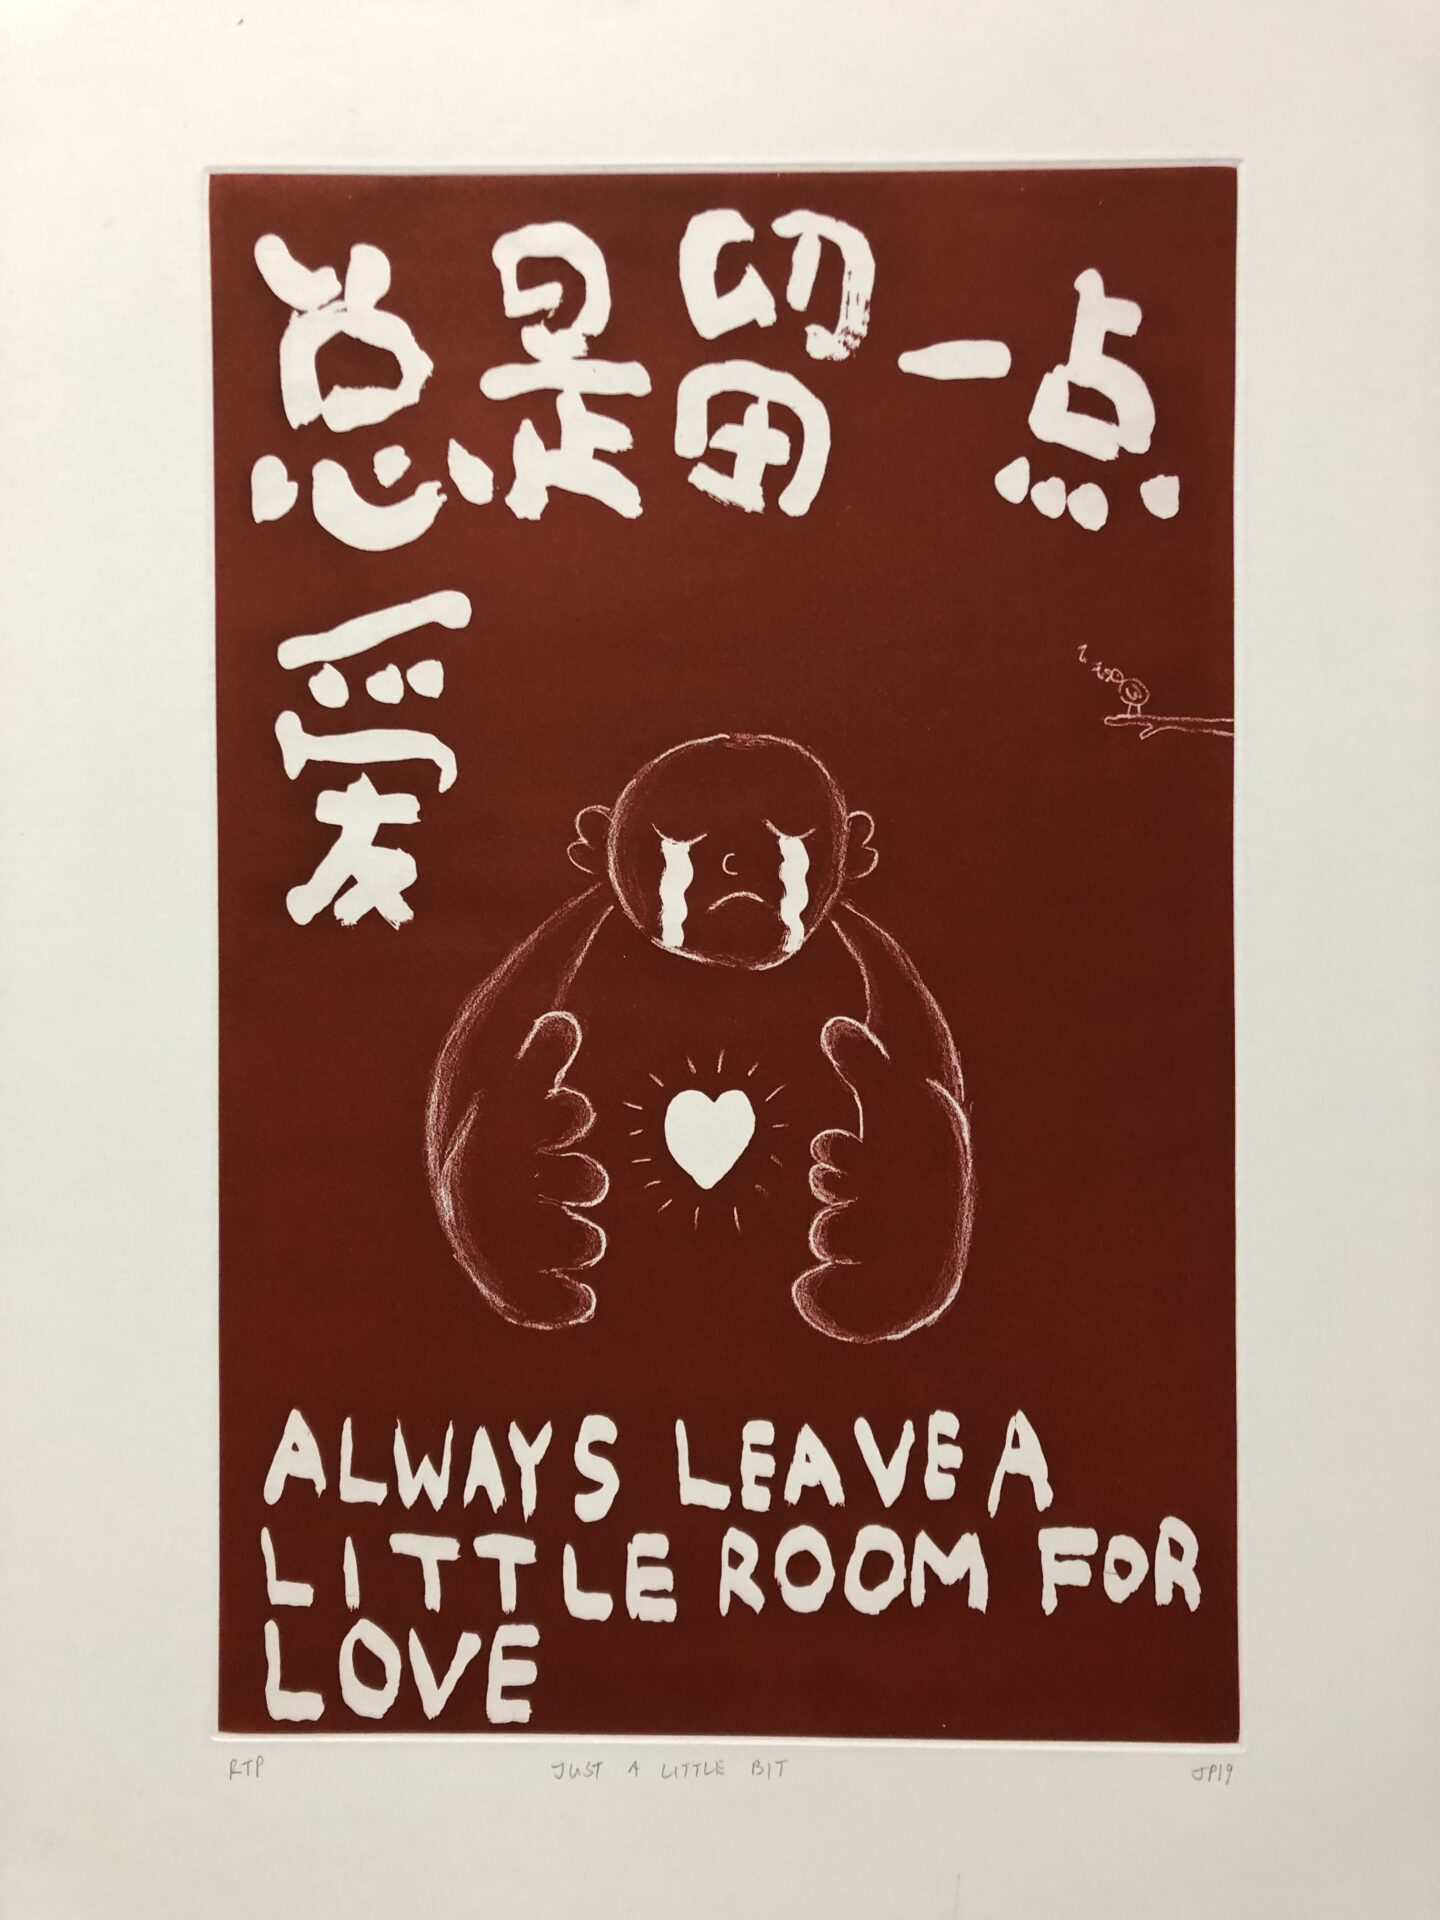 Always leave a little room for love